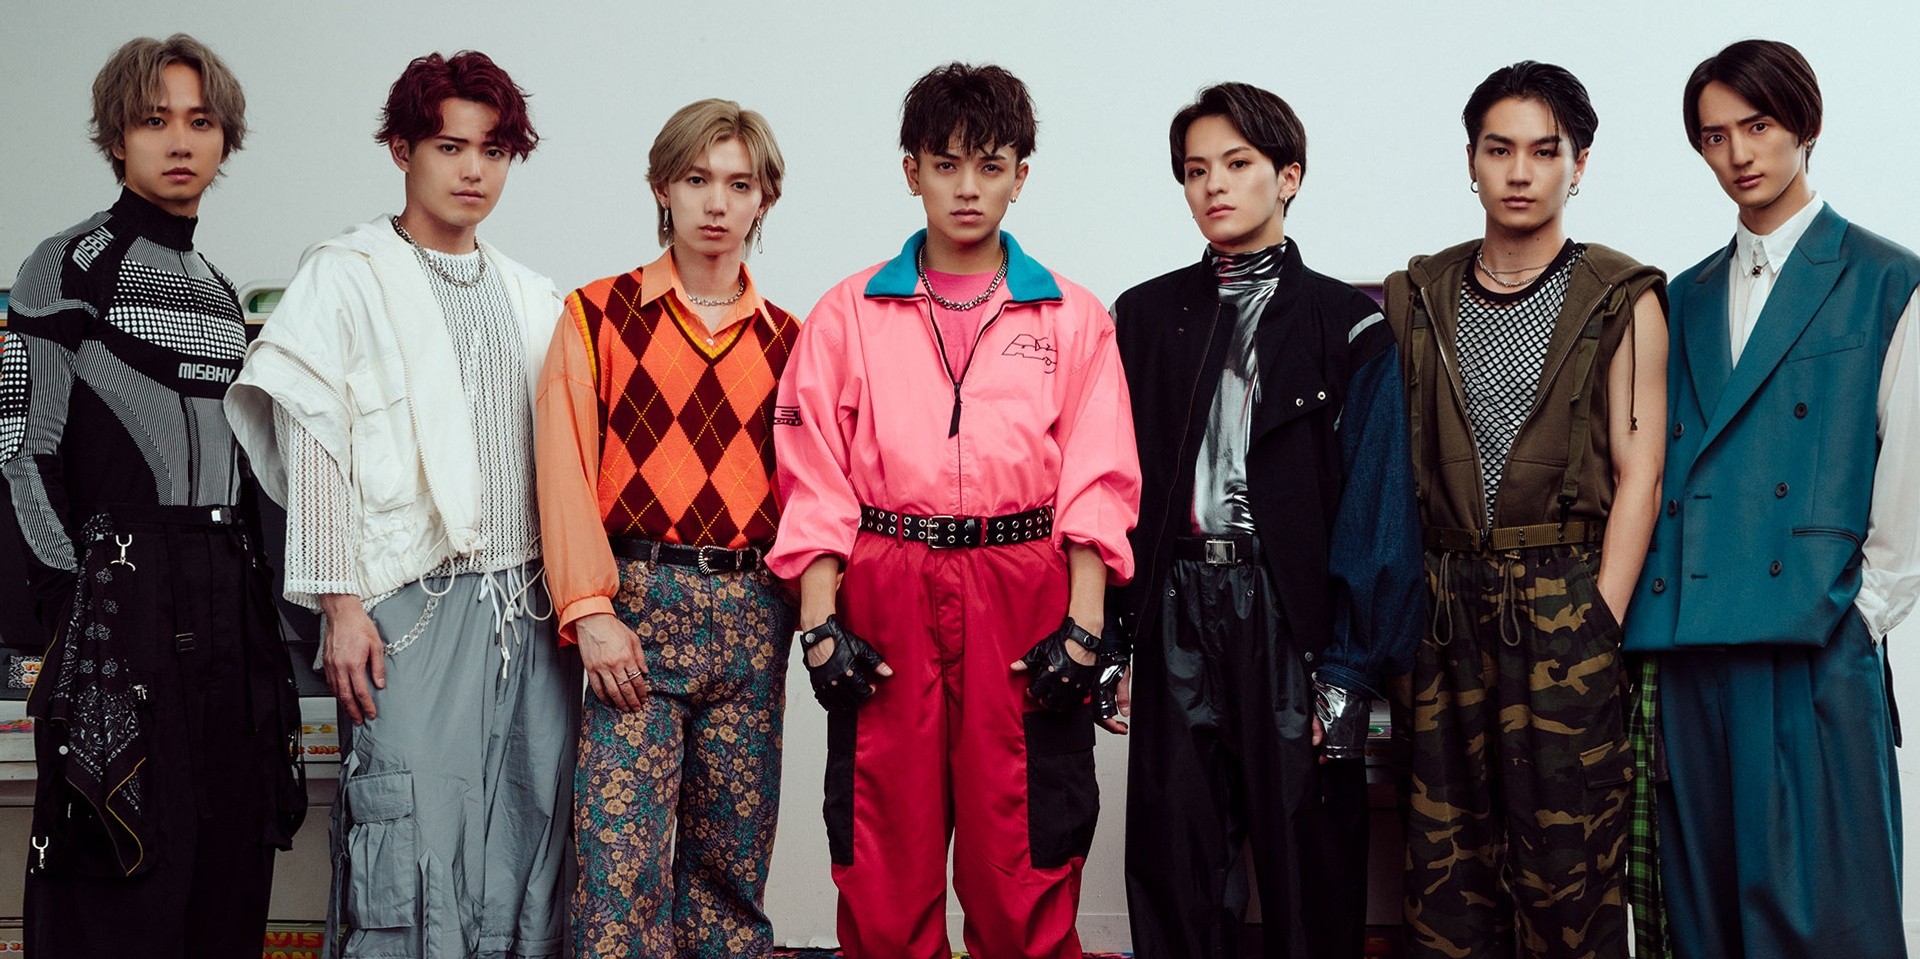 Travis Japan drop new single 'LEVEL UP' from debut album Road to A – listen